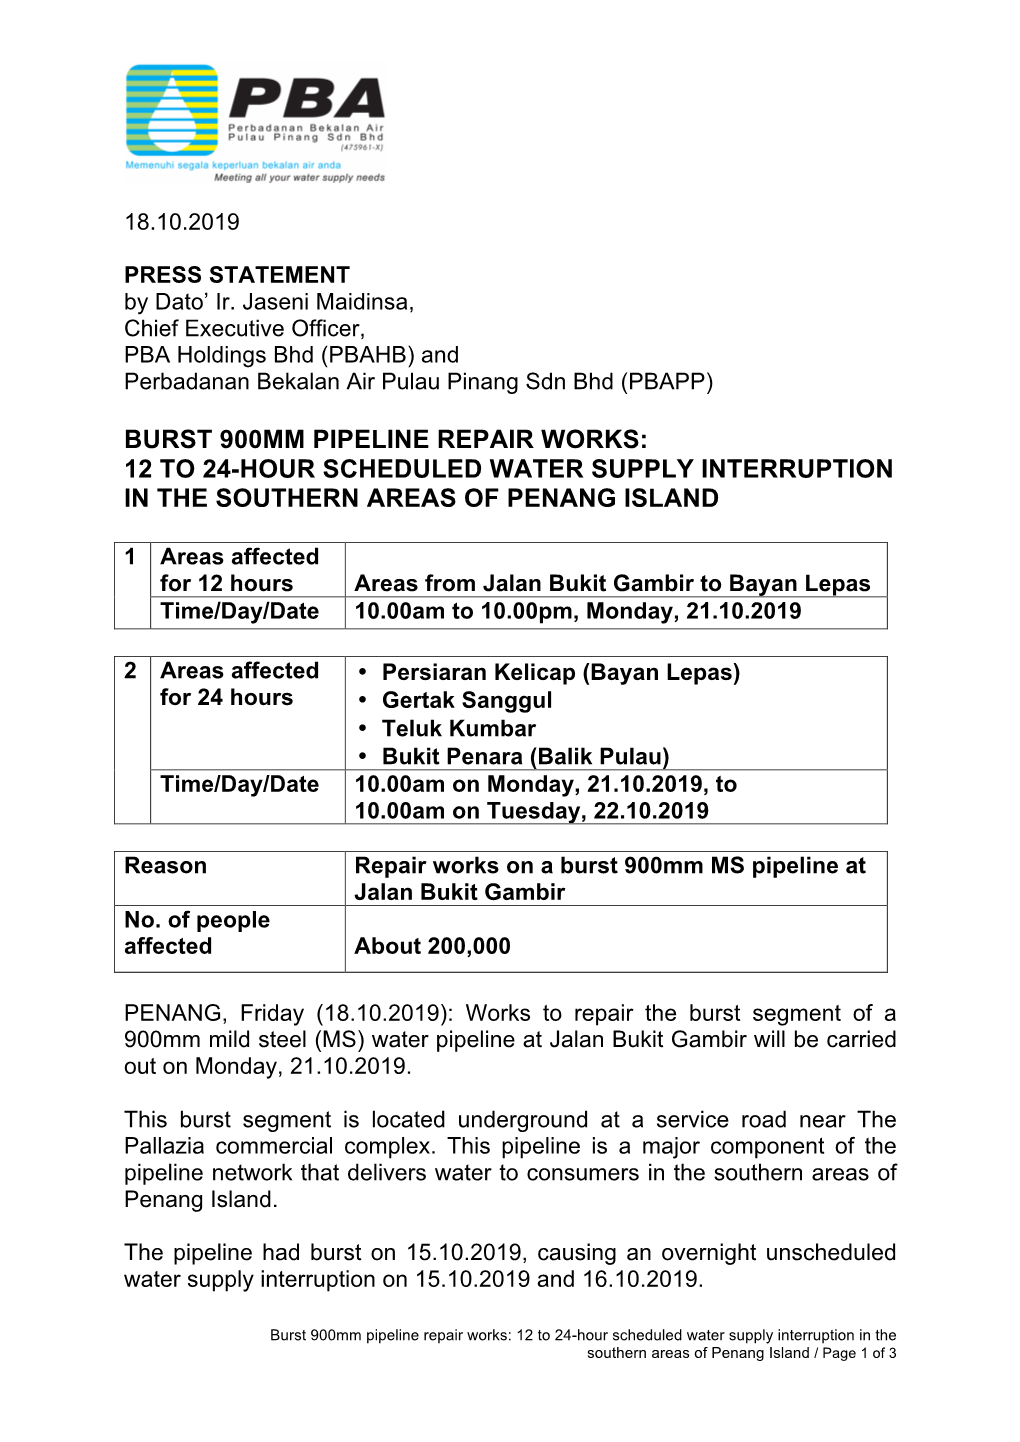 Burst 900Mm Pipeline Repair Works: 12 to 24-Hour Scheduled Water Supply Interruption in the Southern Areas of Penang Island